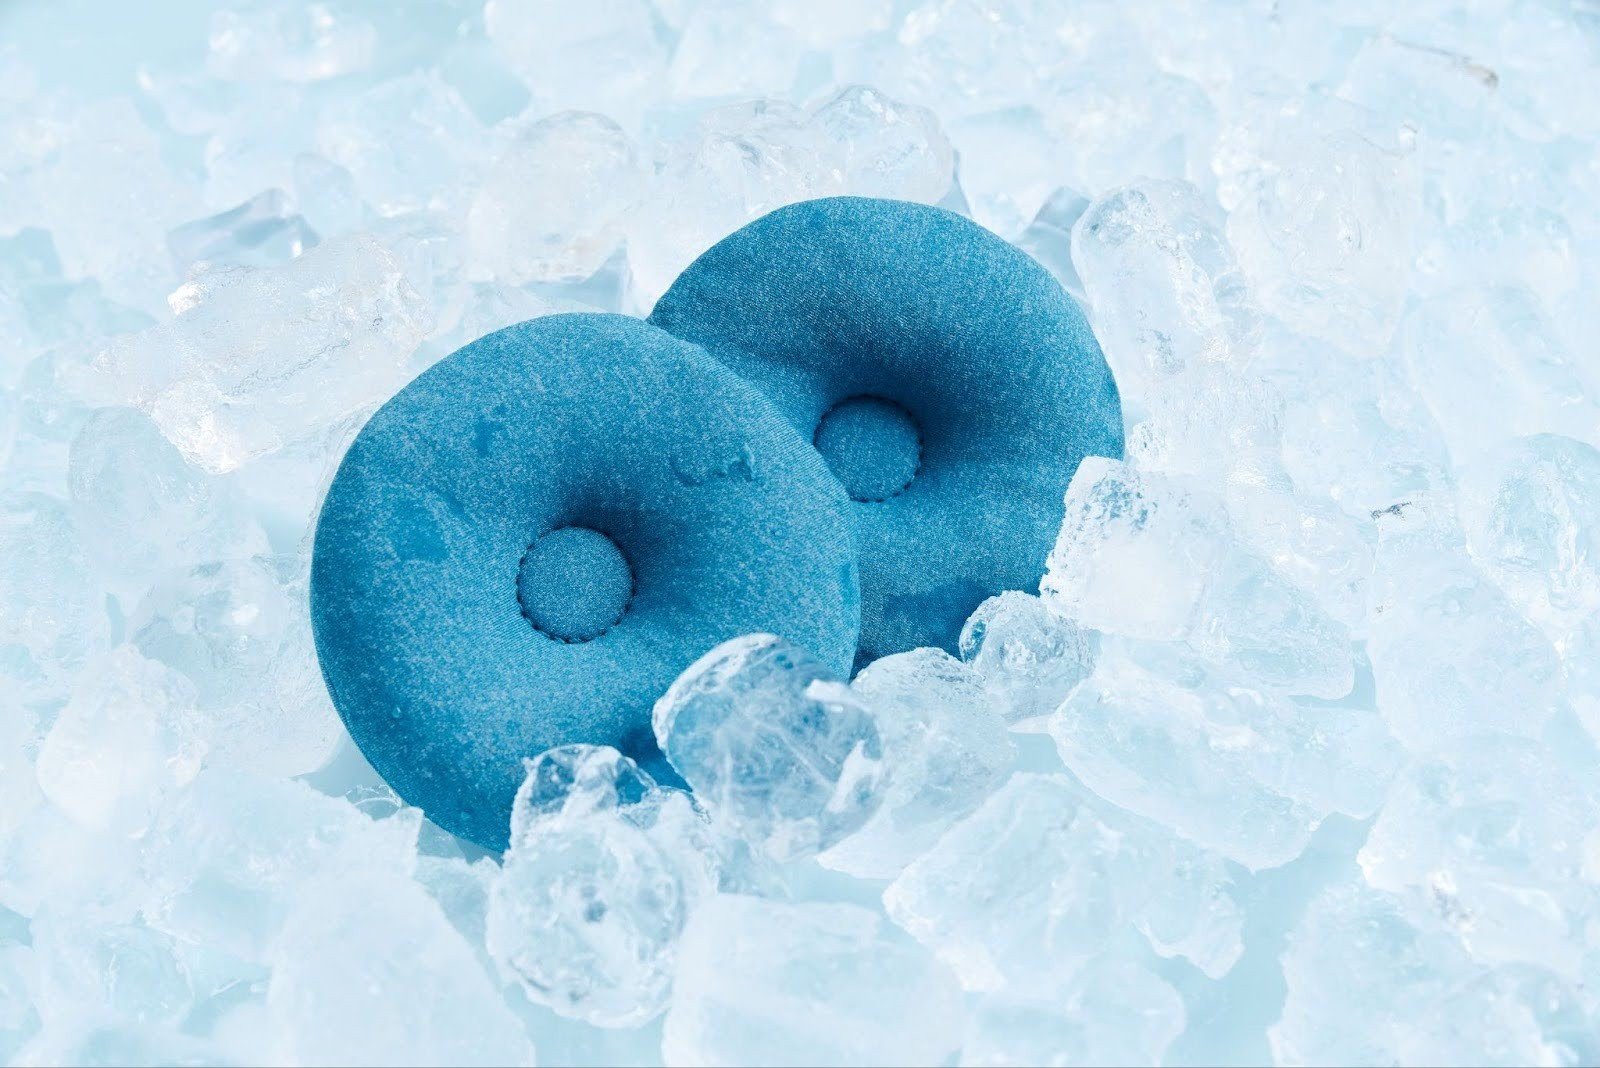 Two circular cooling eye cups sitting on ice cubes.